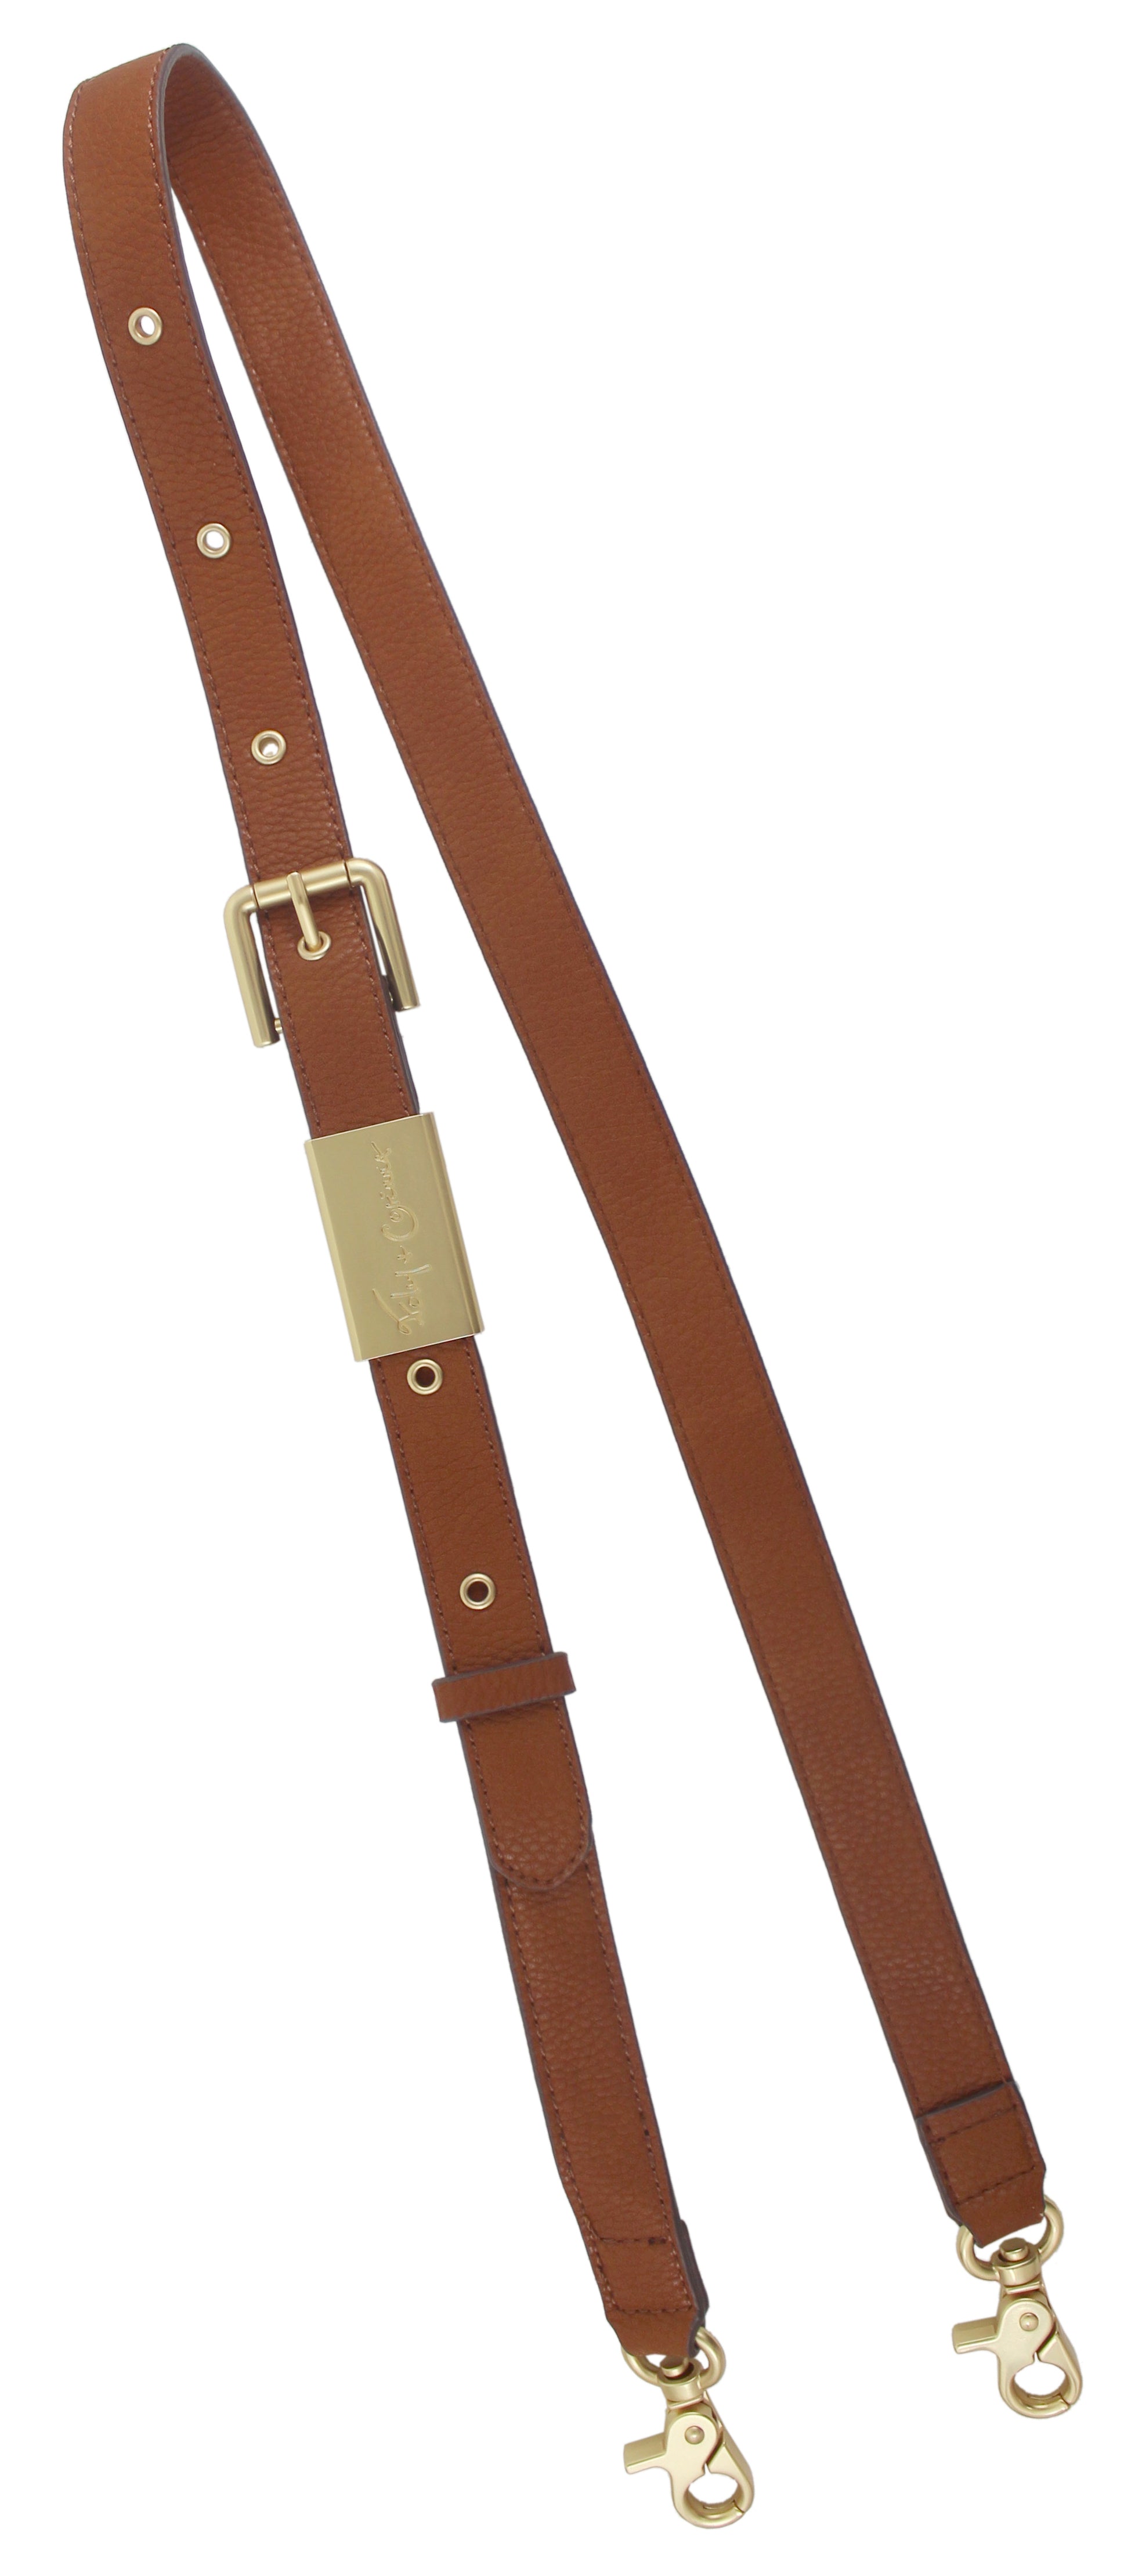 Replacement Crossbody Strap in Cognac (Large) - Foley + Corinna